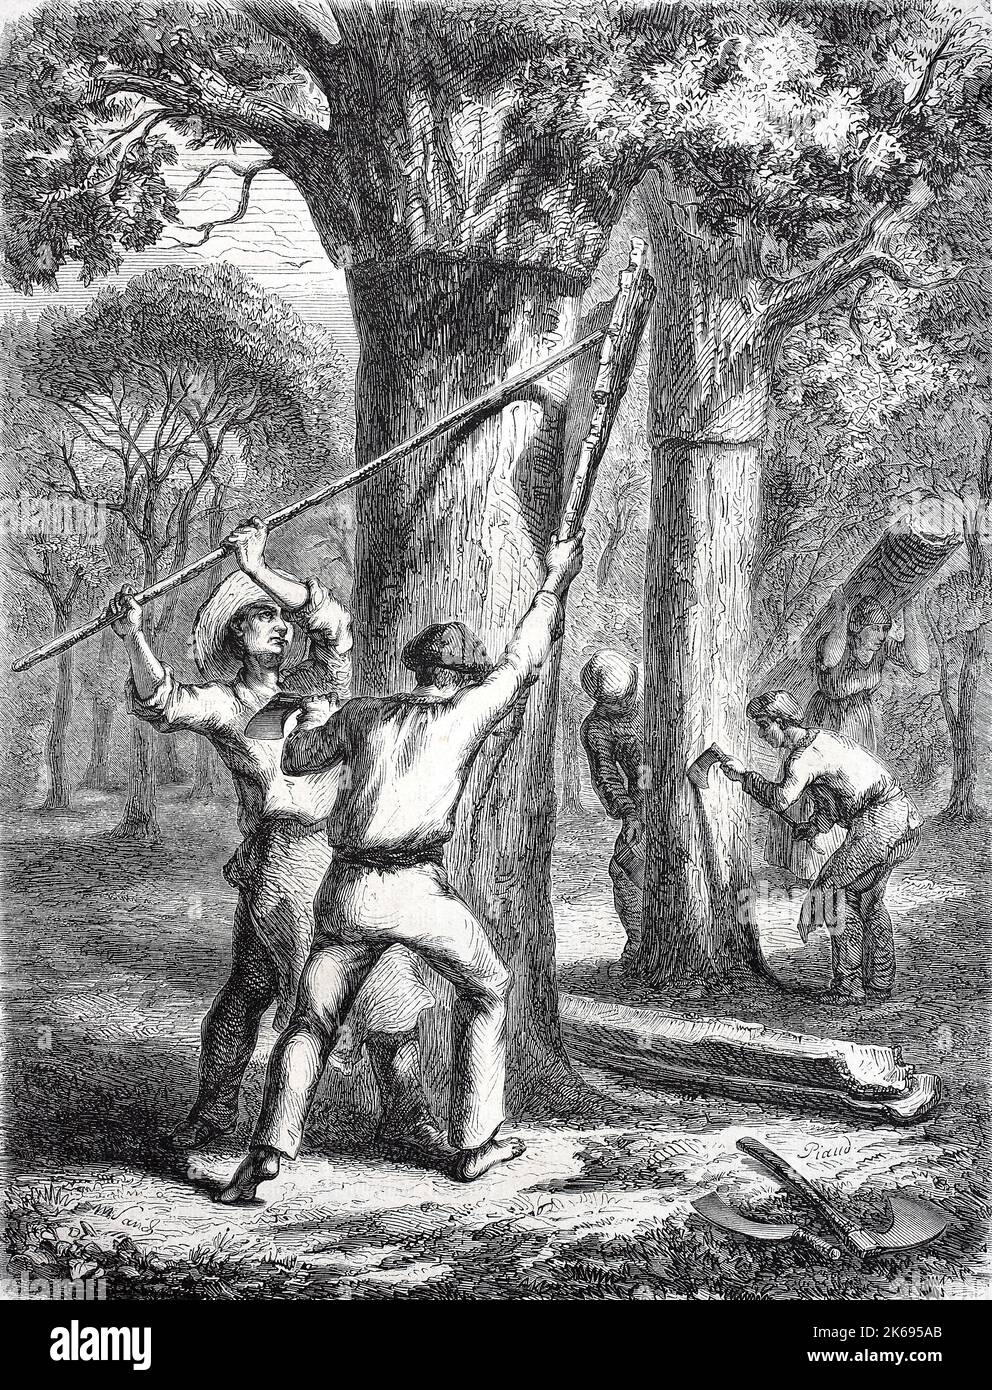 Digital improved reproduction, Cork harvest, the peeling of cork oaks, Quercus suber, in Portugal, original woodprint from th 19th century Stock Photo